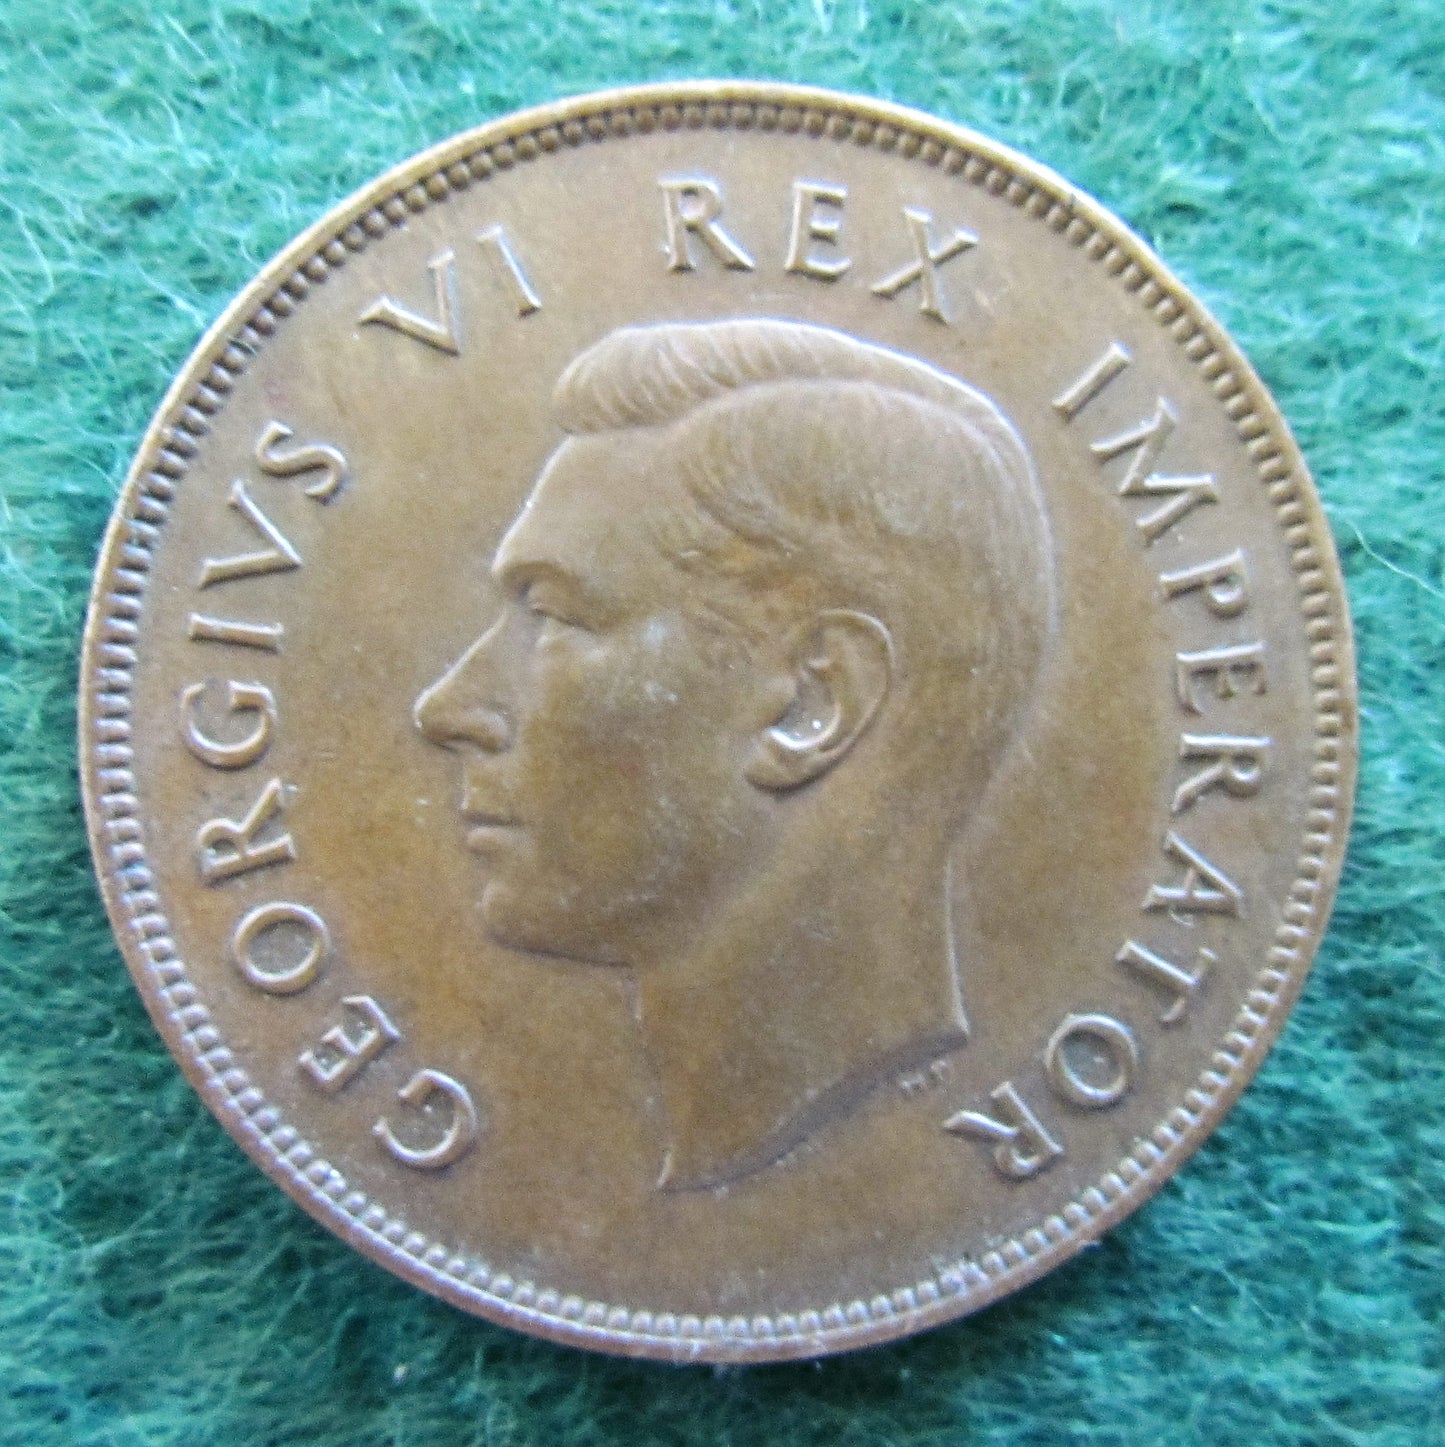 South Africa 1940 1 Penny Coin